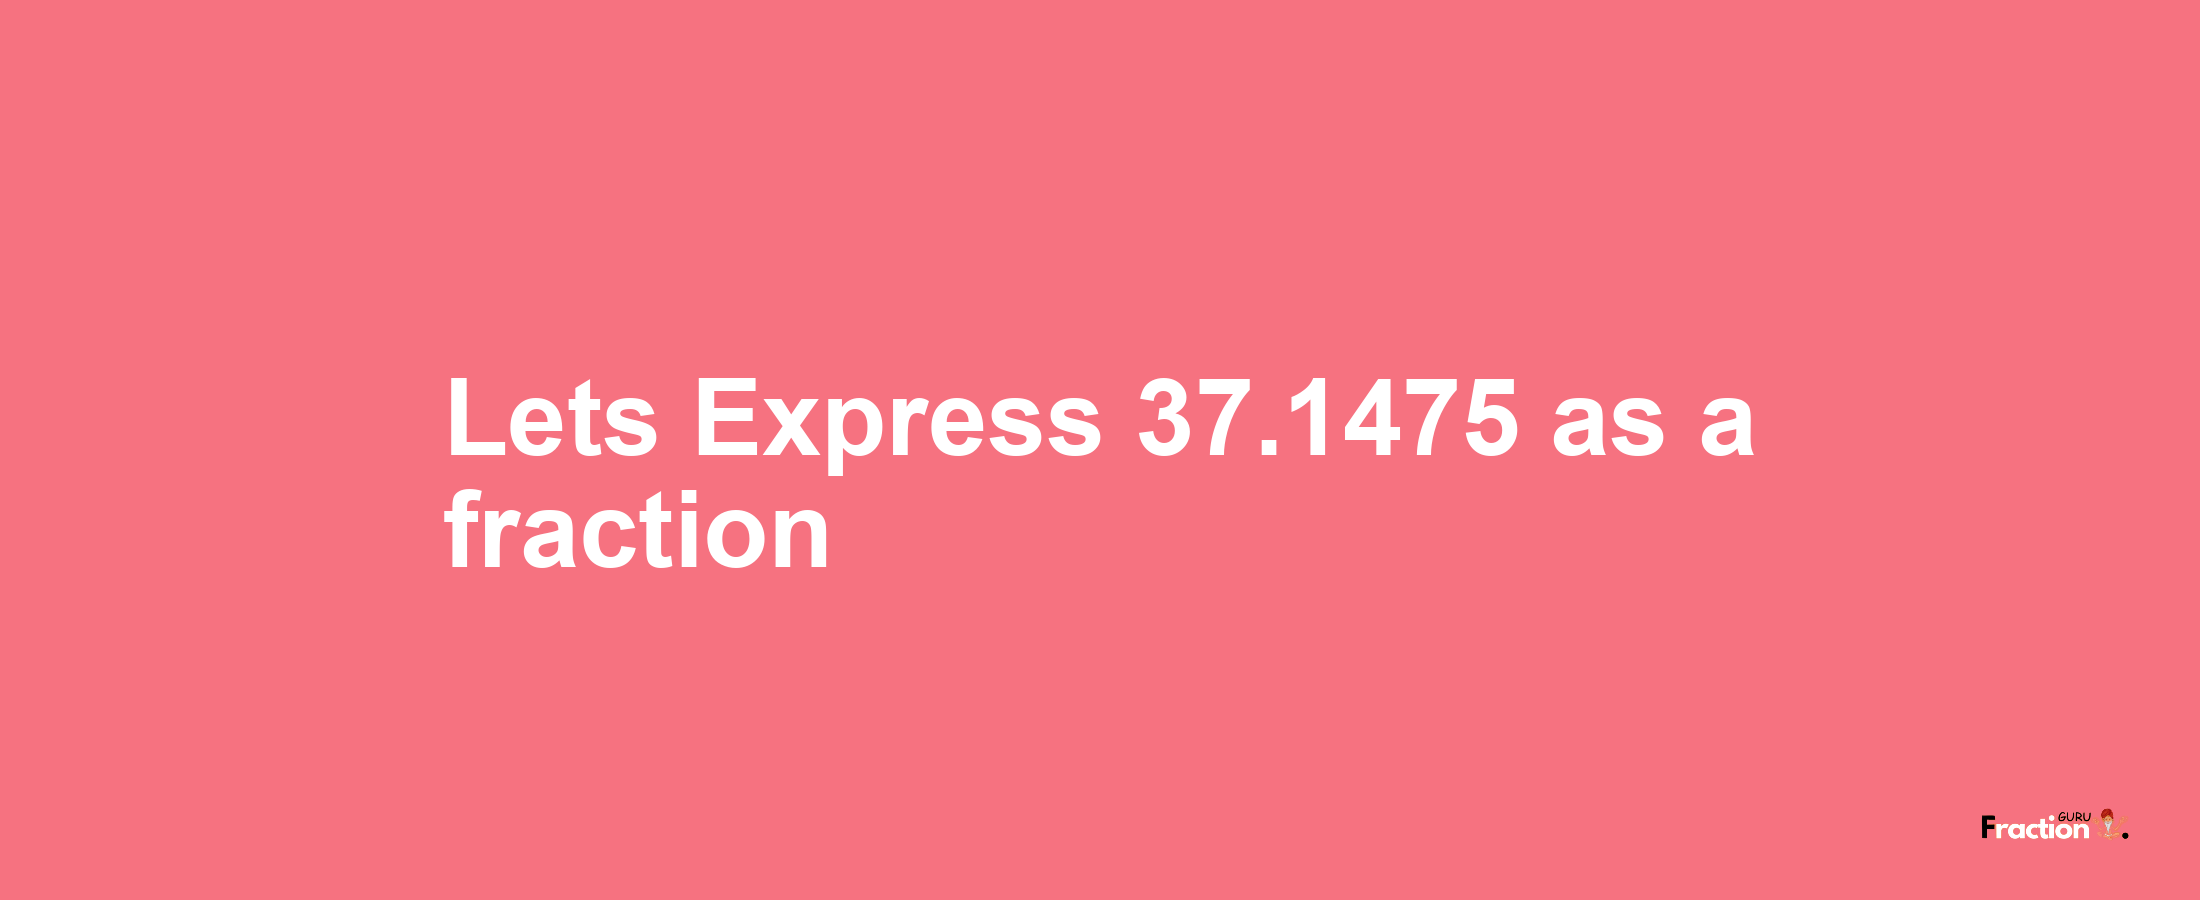 Lets Express 37.1475 as afraction